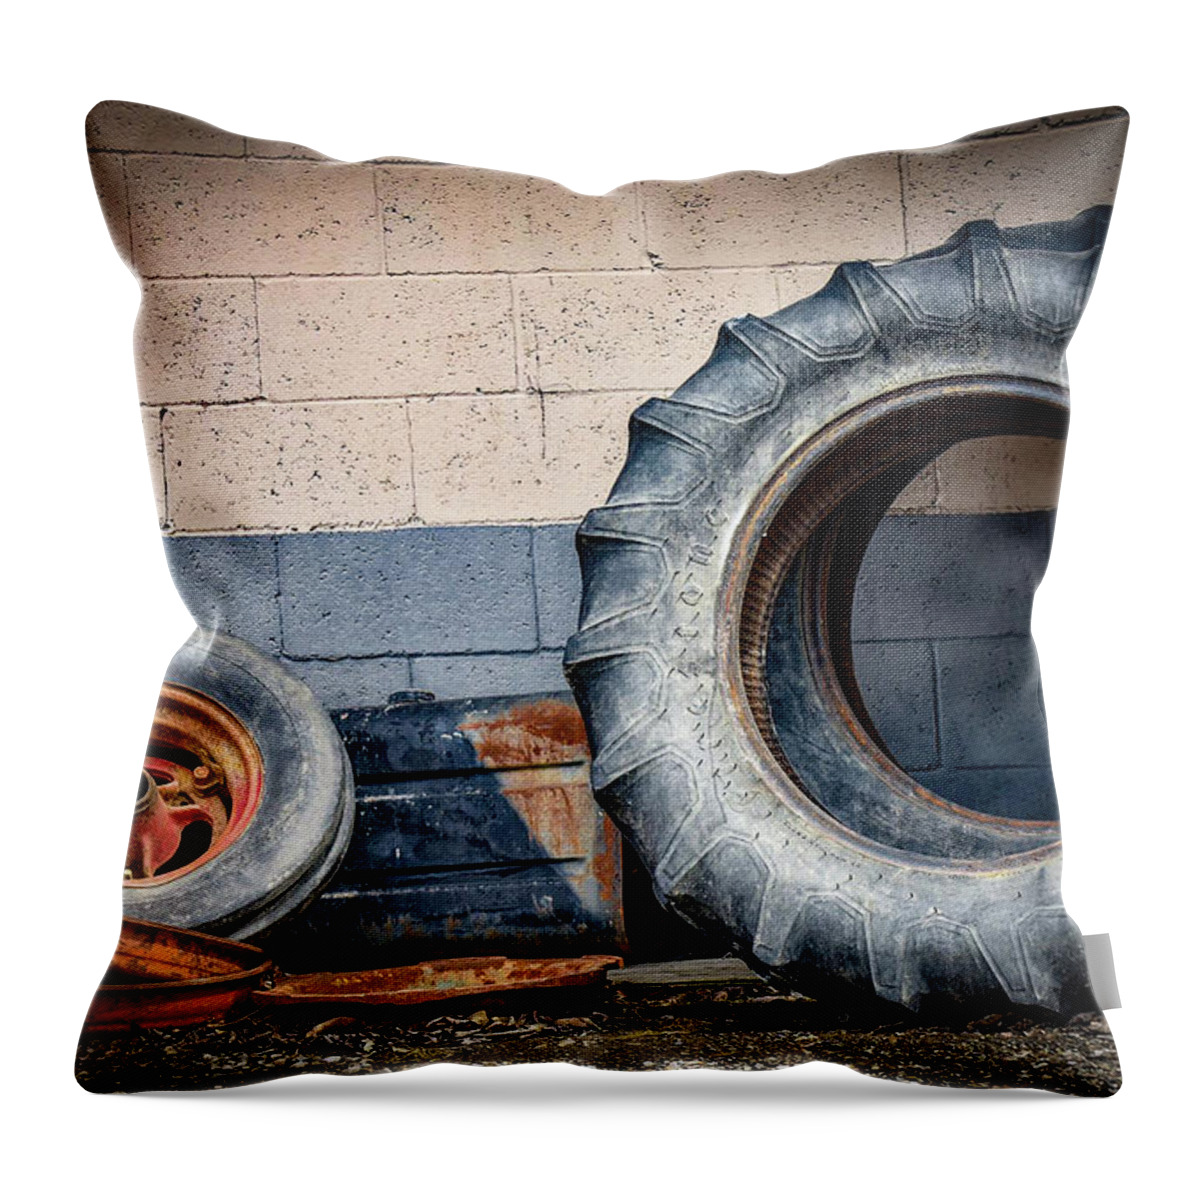 Tires Throw Pillow featuring the photograph Wheels by Michelle Wittensoldner